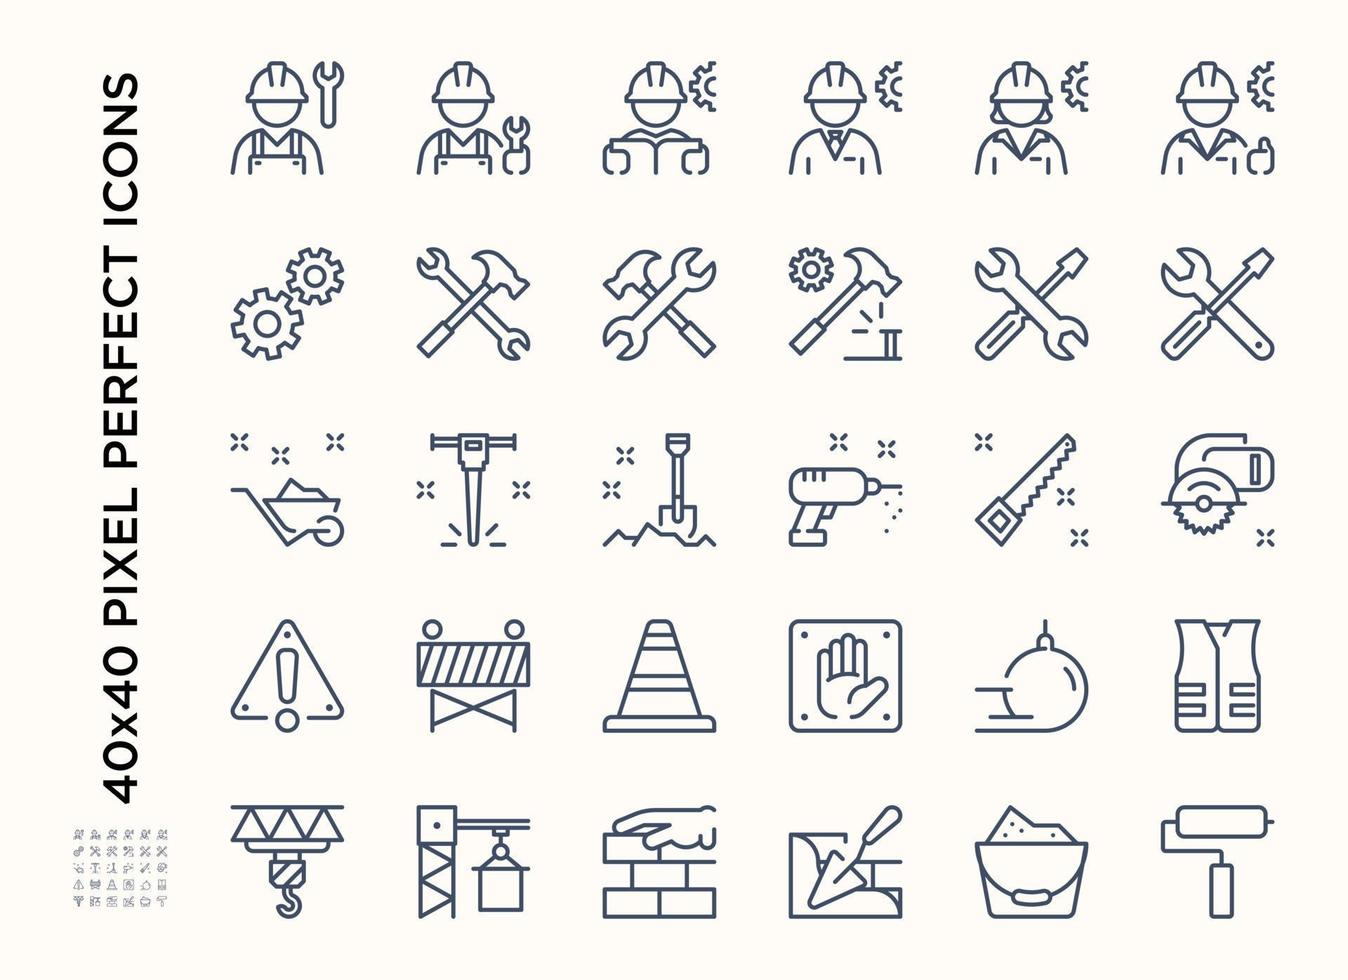 Simple set of Construction icon set. Contains such Icons as Builders, Building tools, Building signage, Building work. Editable stroke vector